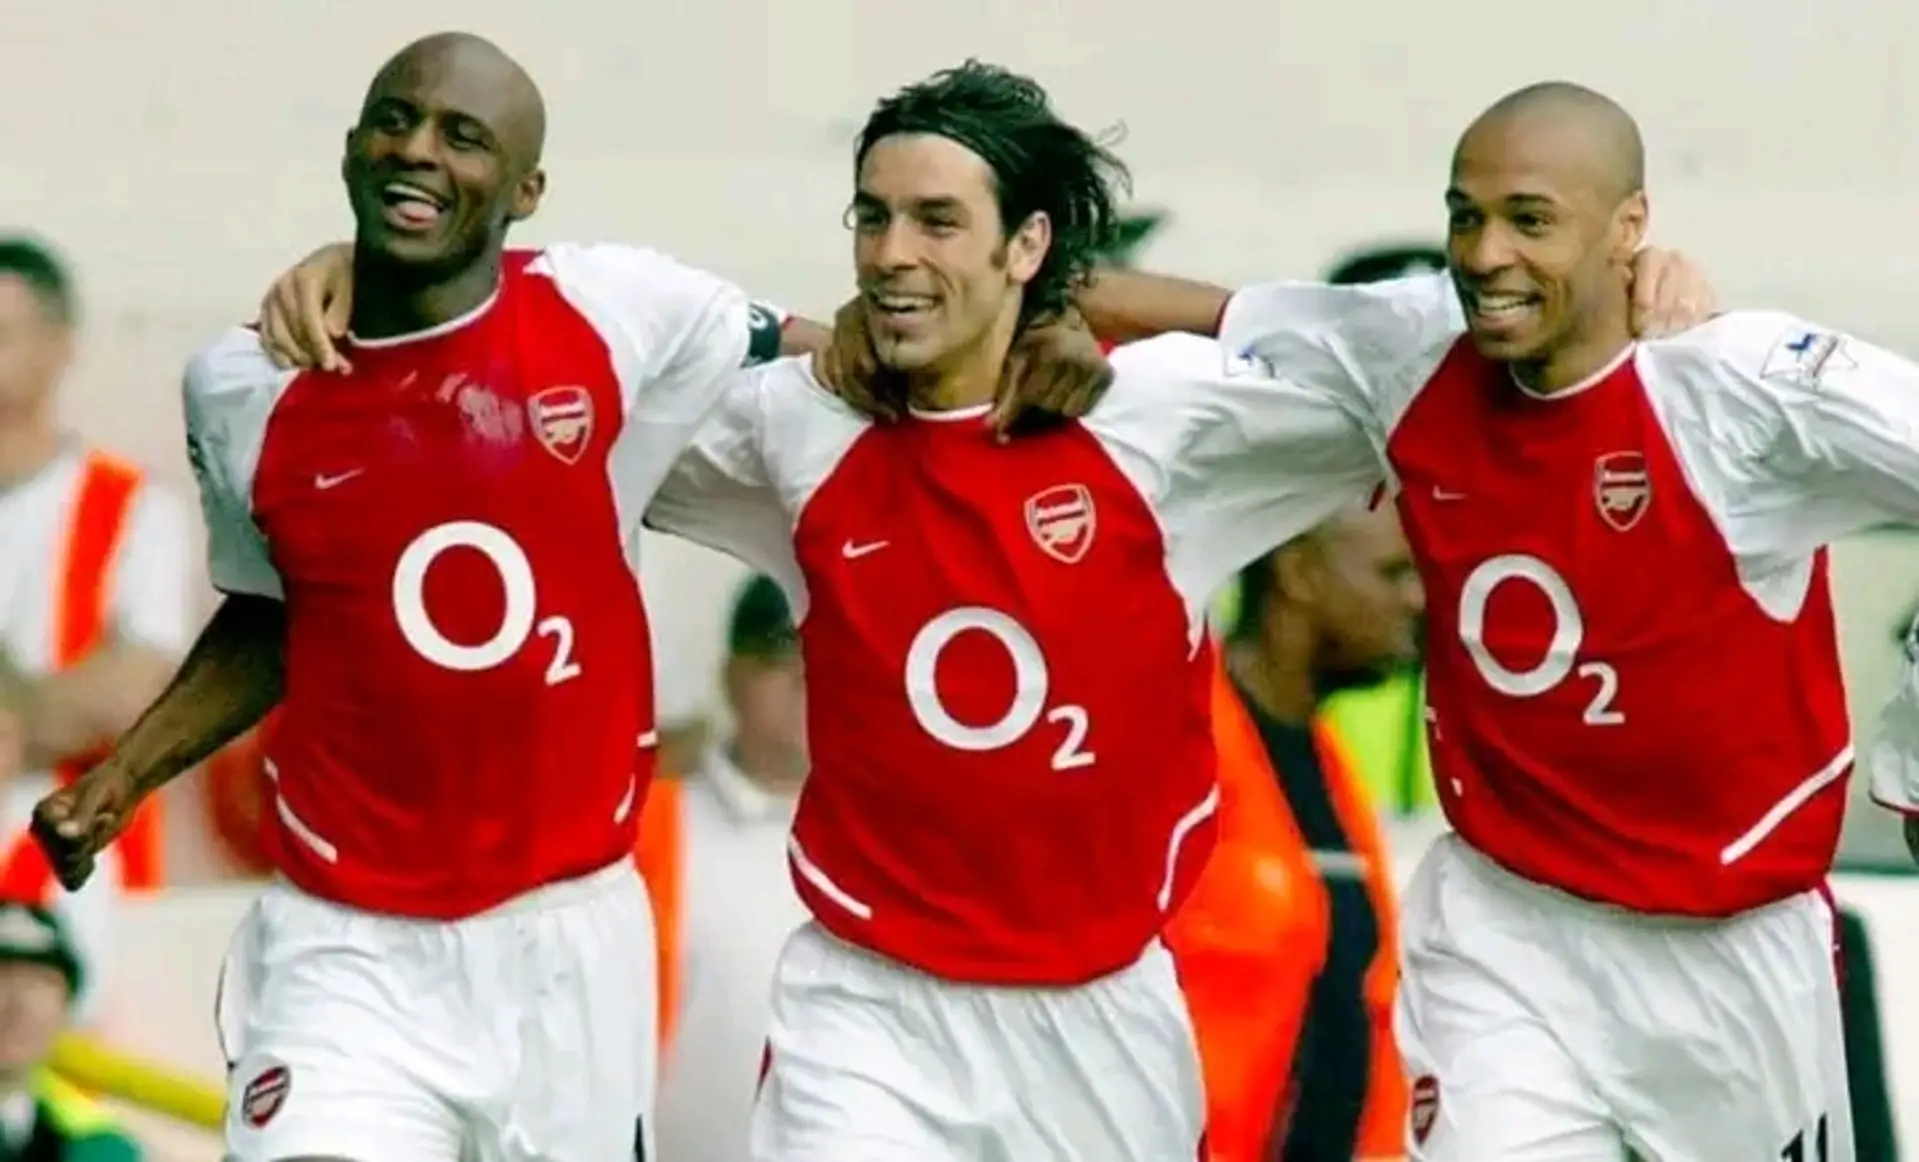 The French Connection (Patrick Vieira, Robert Pires & Thierry Henry) W